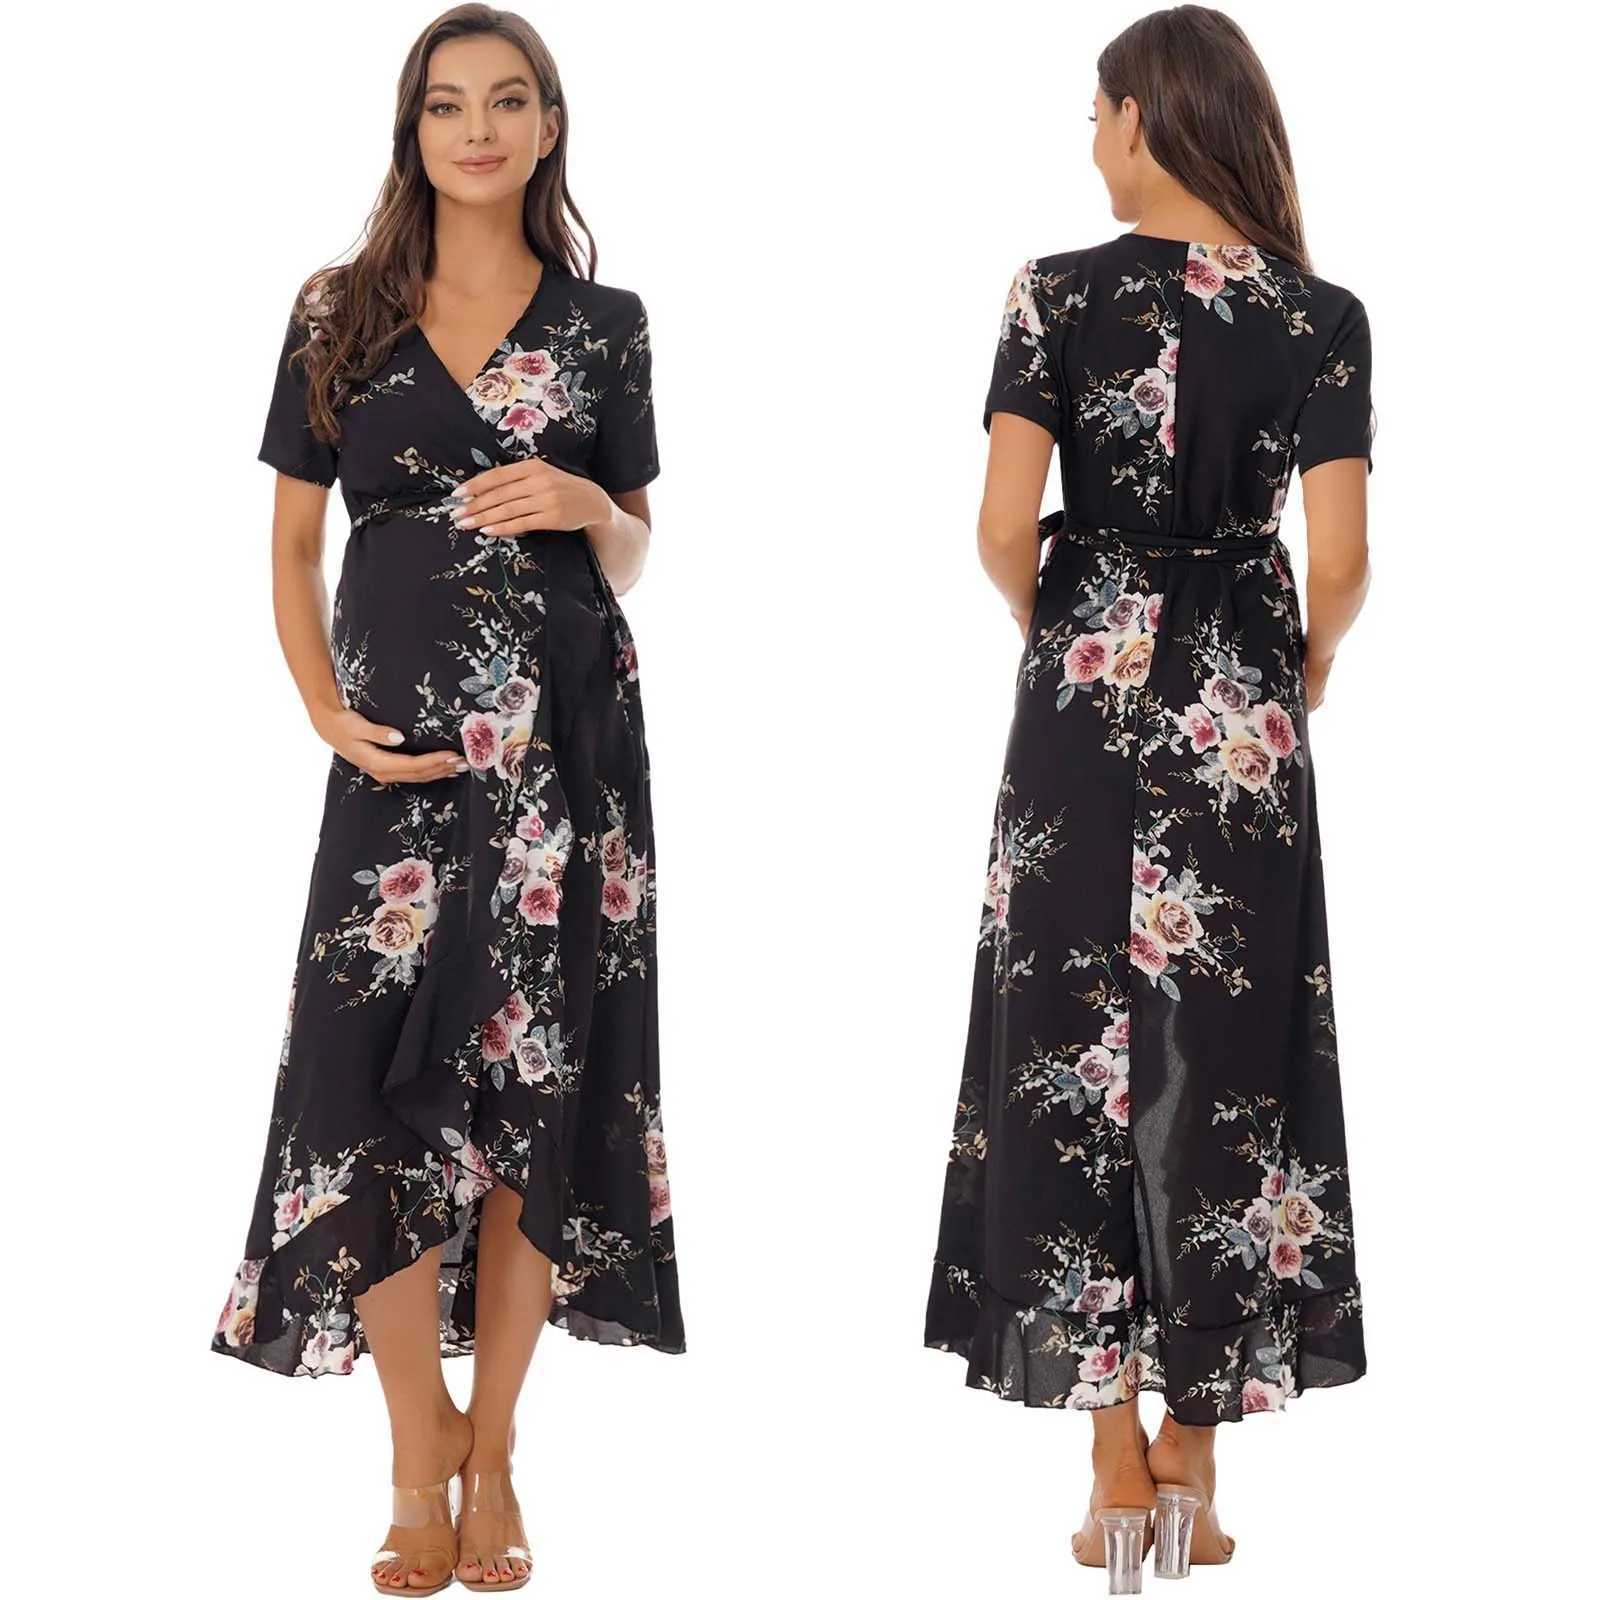 Maternity Dresses Pregnant womens printed chiffon dress with V-neck short sleeved bag and long skirt suitable for parties daily wear summer Q2404271